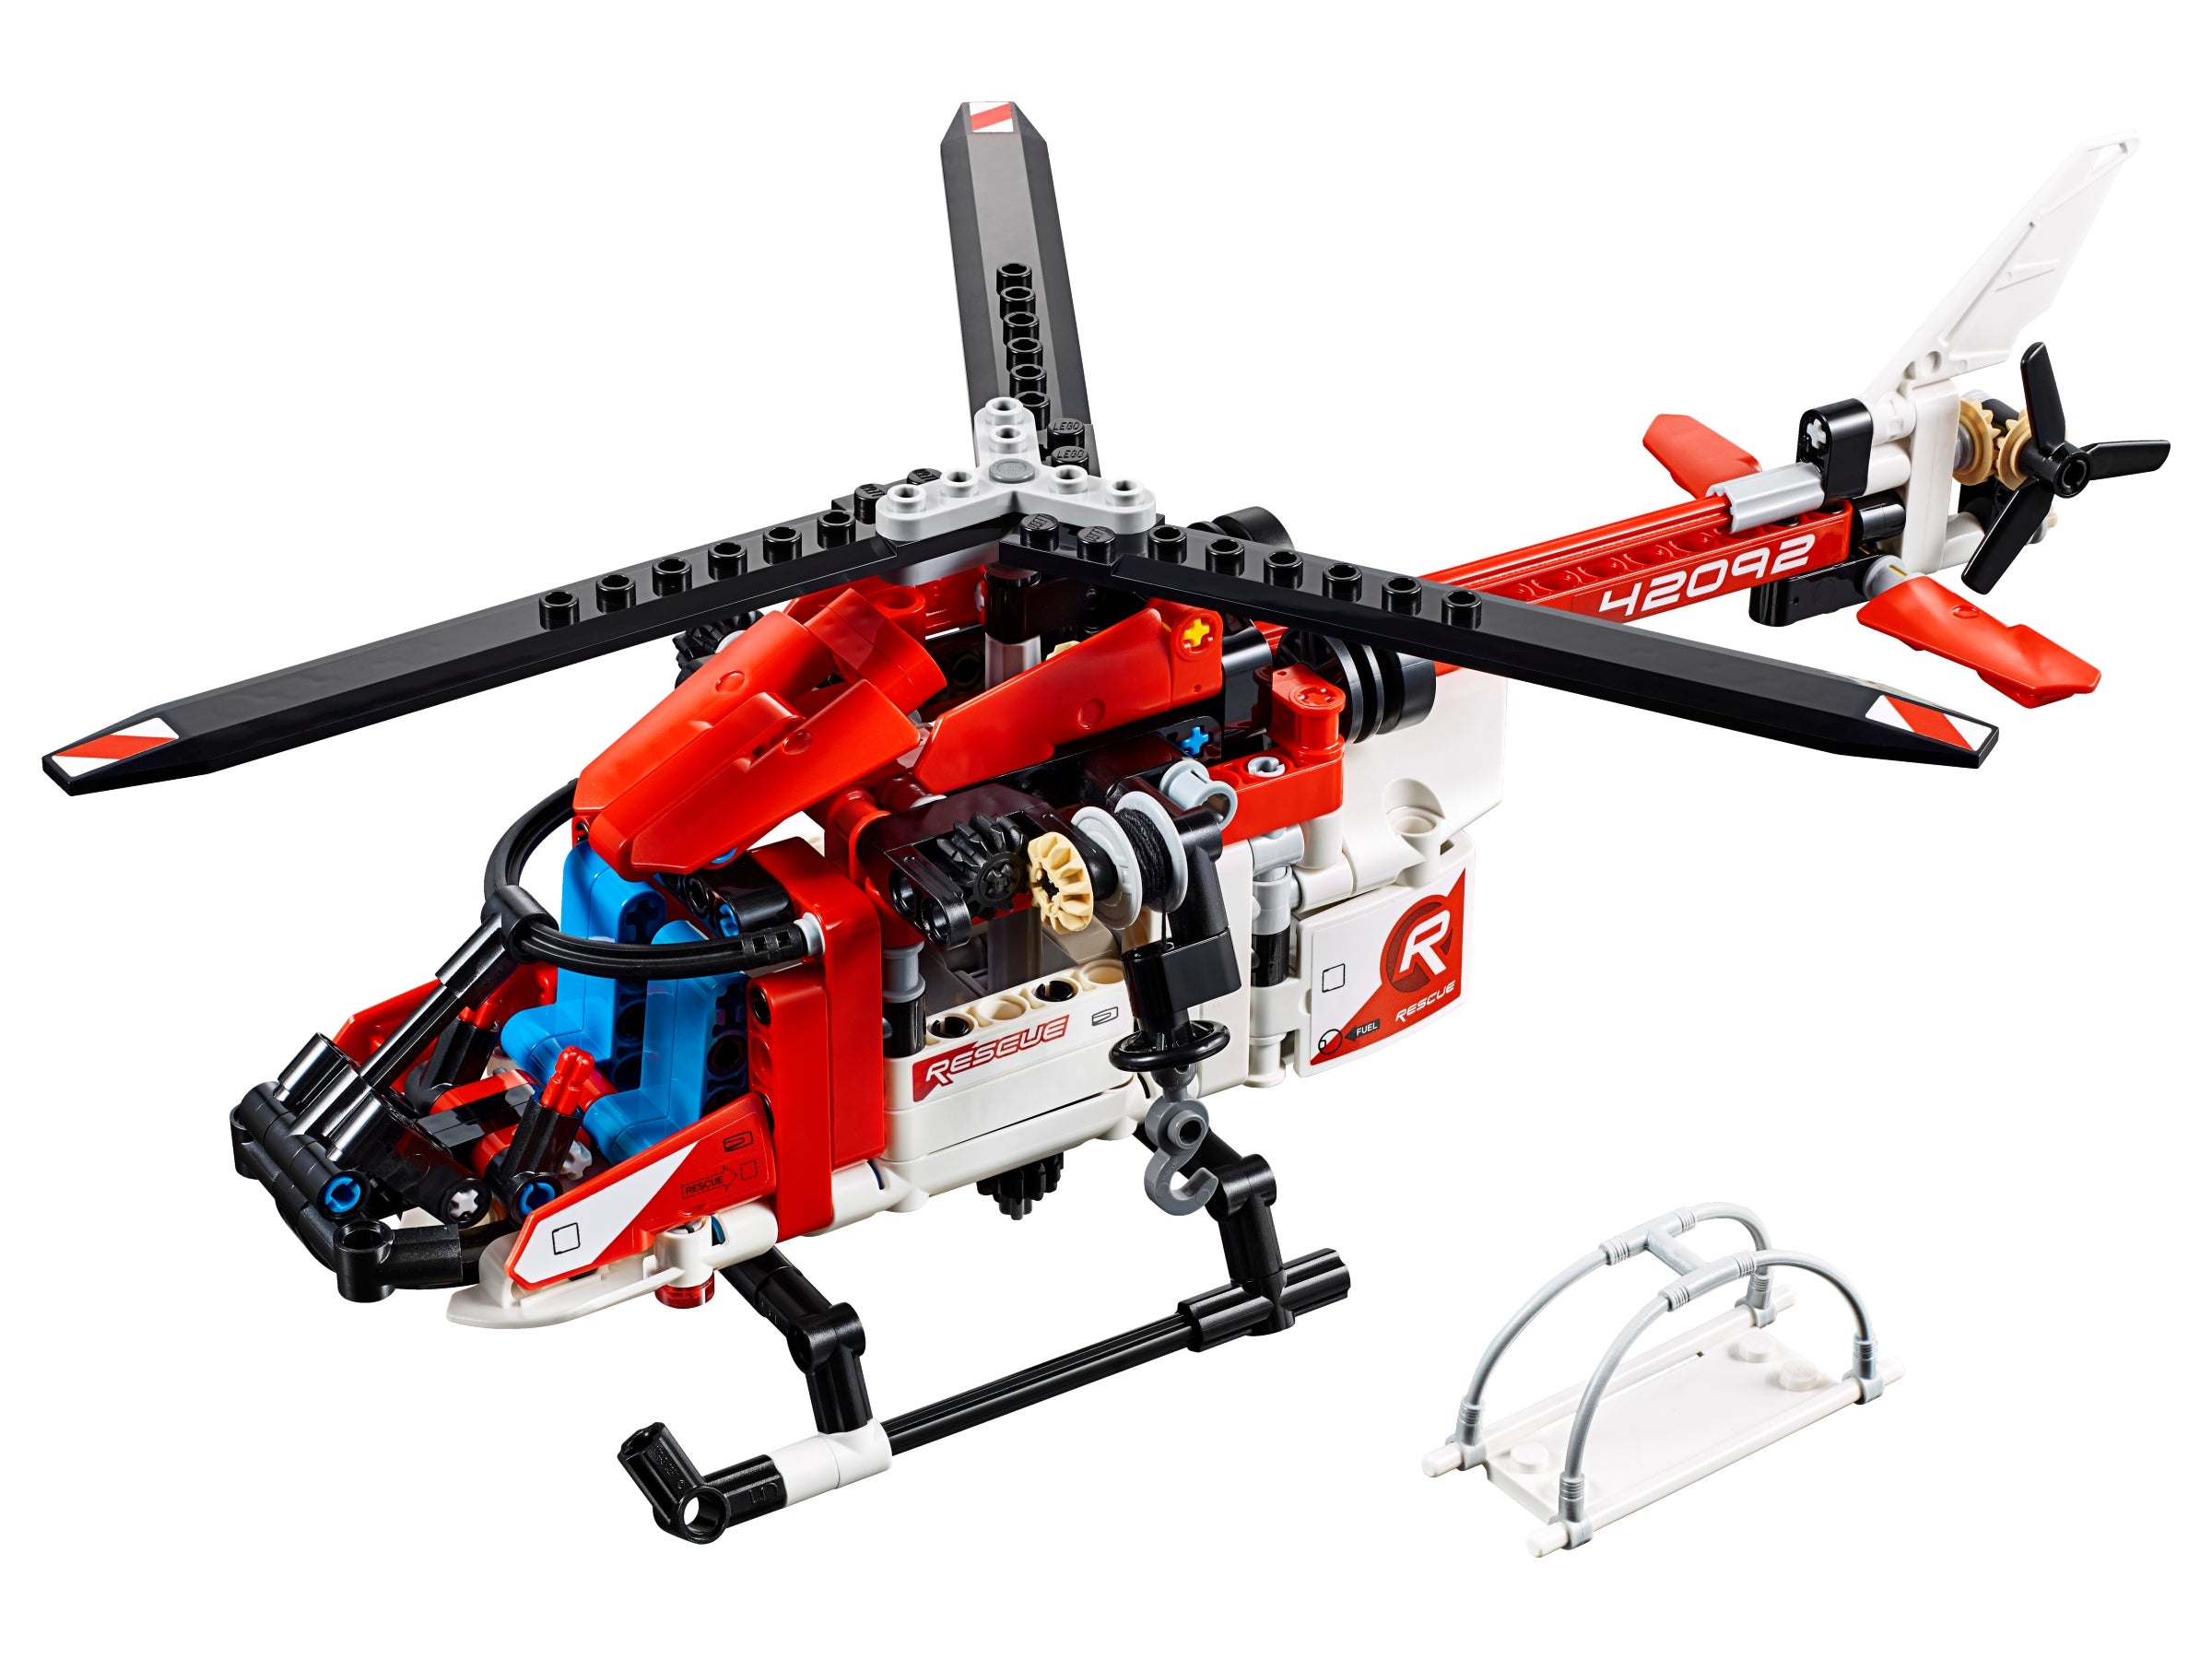 NEW 9396 RESCUE HELICOPTER 42083 TECHNIC 42110 42092 LEGO COMPITIBLE 40257 42056